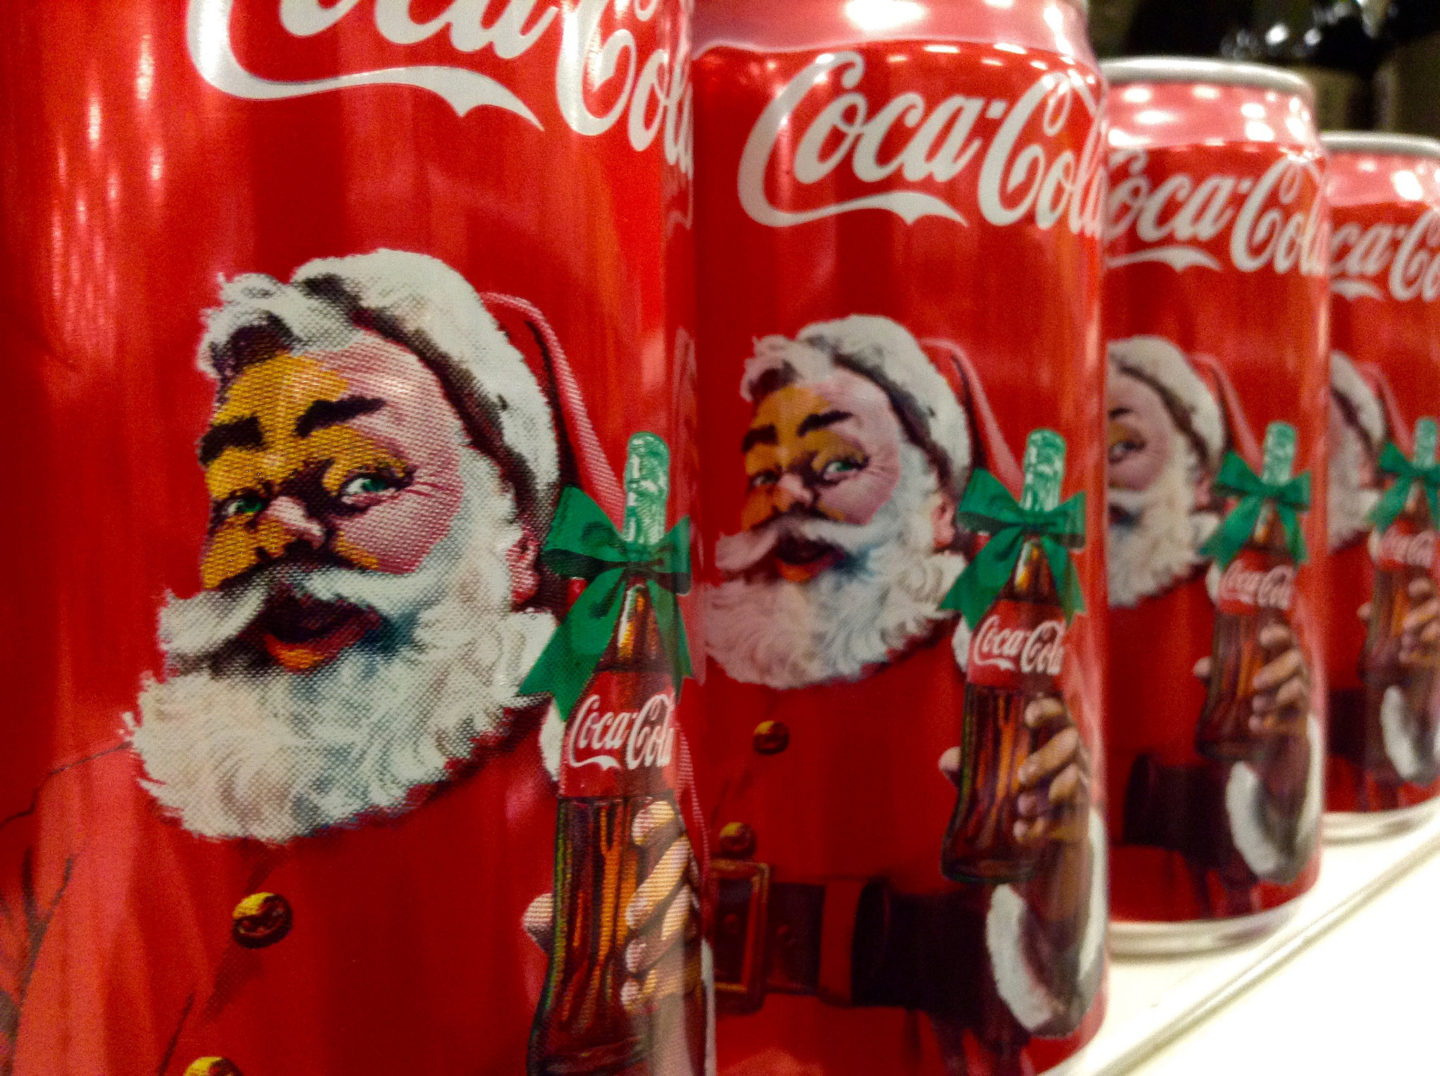 Fact check: No, Claus was not first dressed red by Coca-Cola